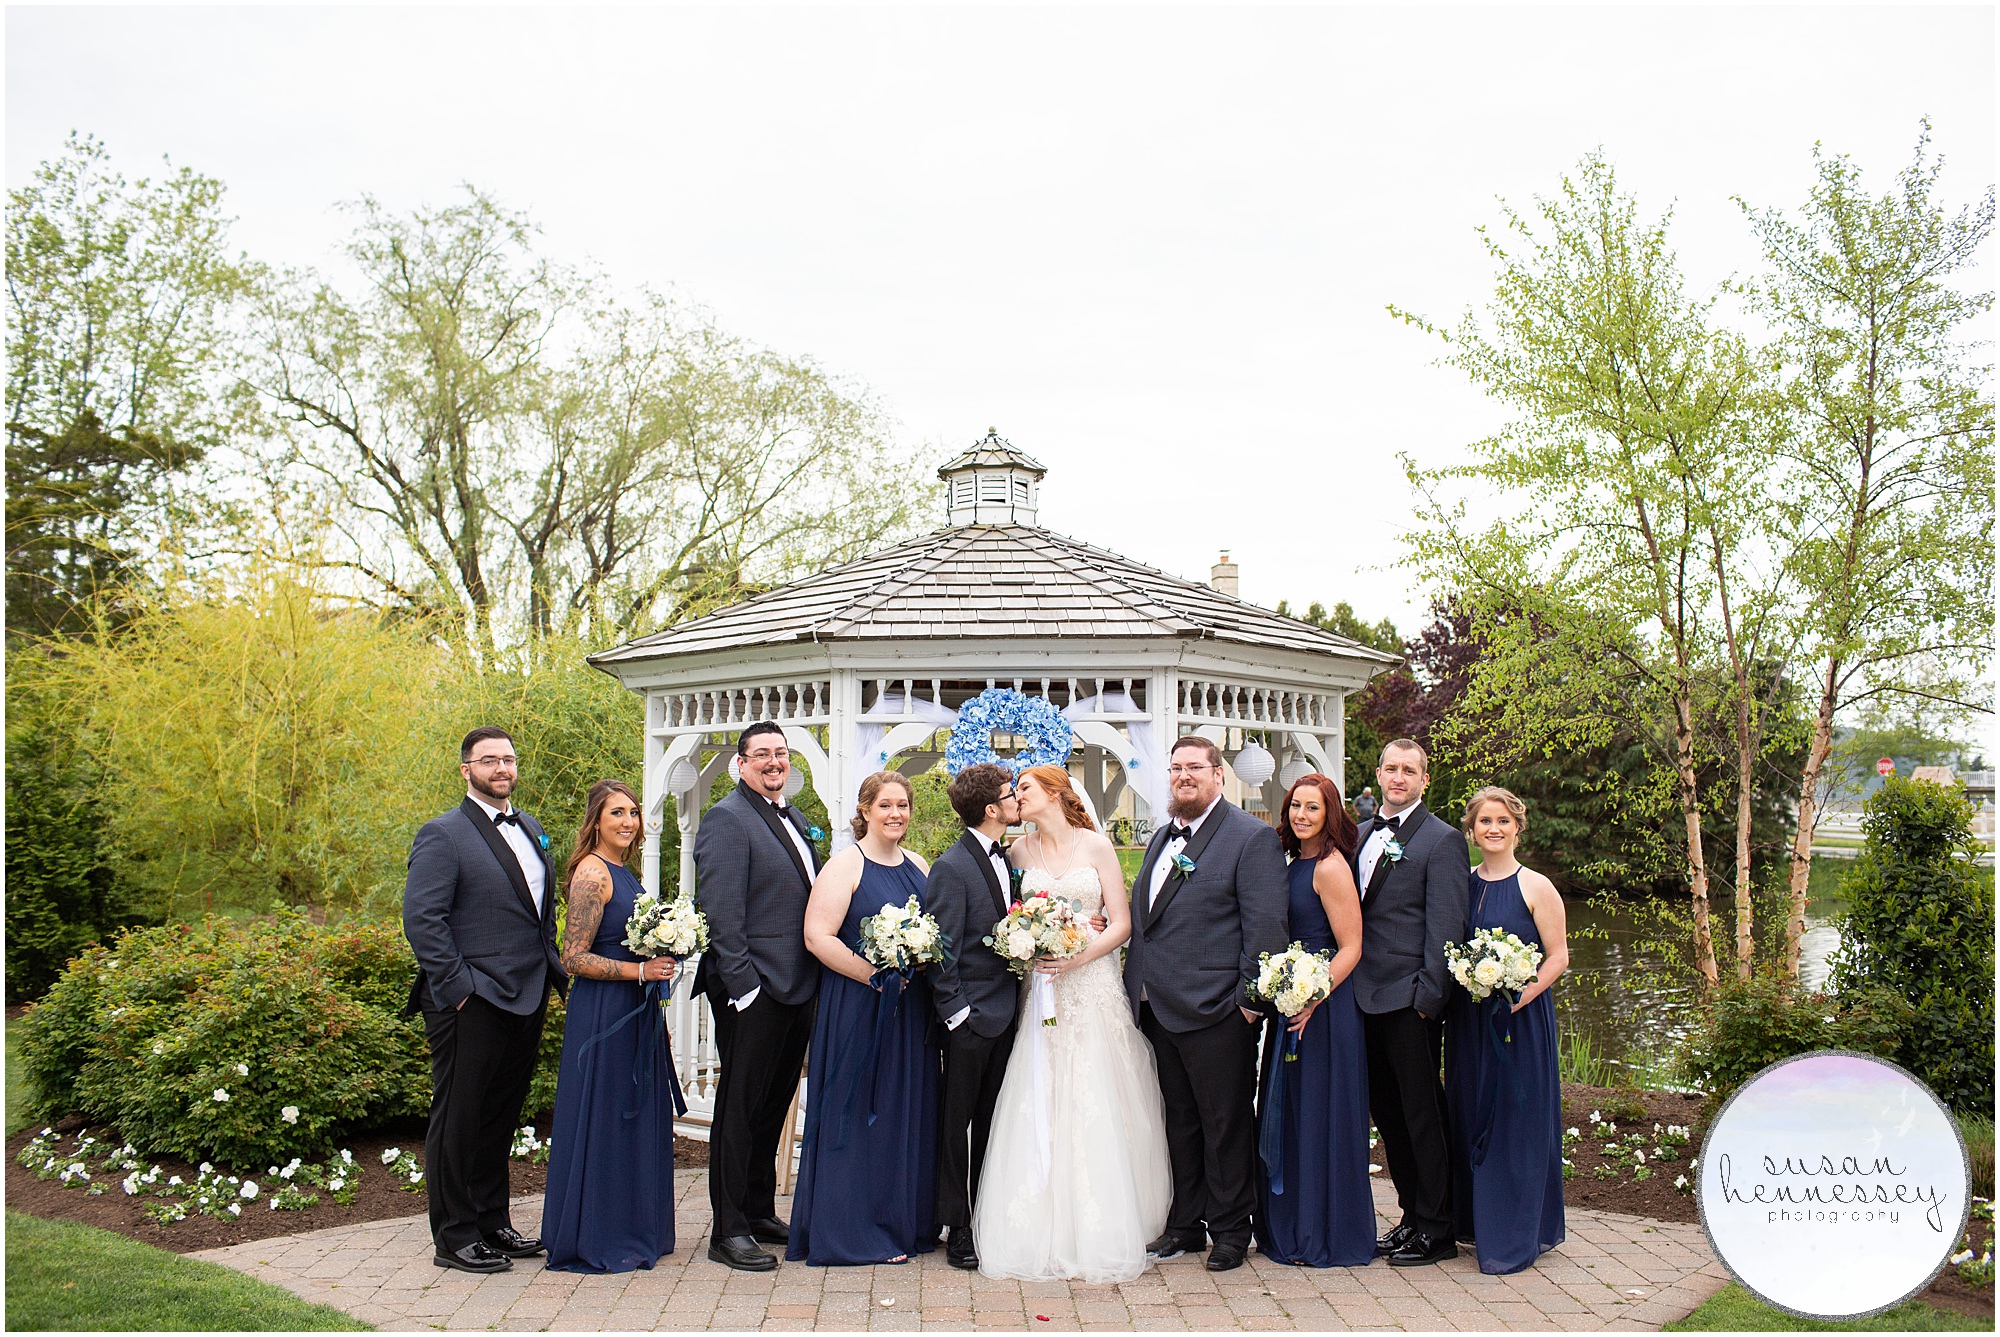 A bride and groom kiss at their wedding with their bridal party.